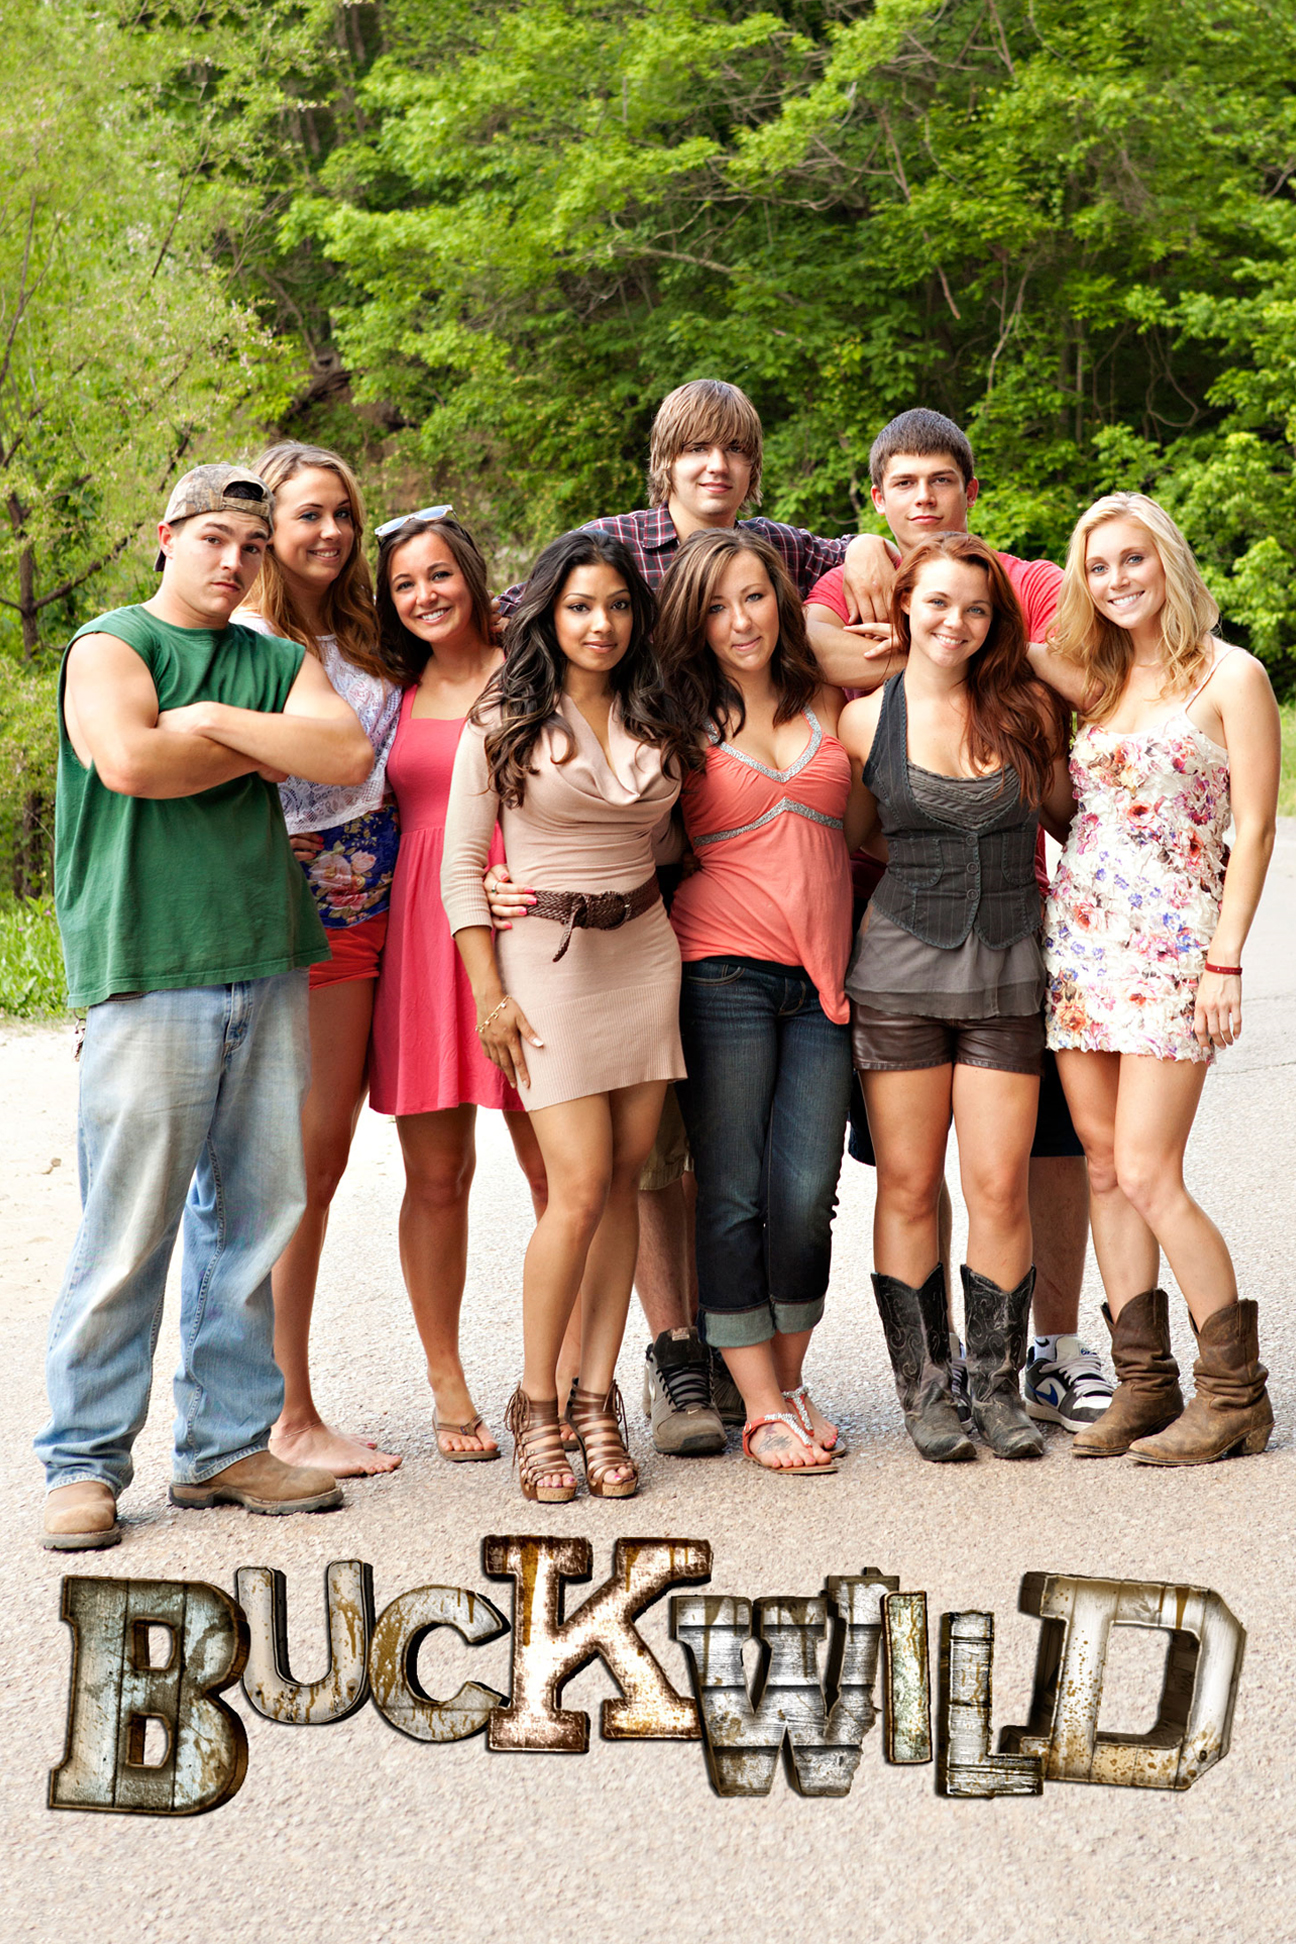 Learn more about the full cast of Buckwild with news, photos, videos and mo...